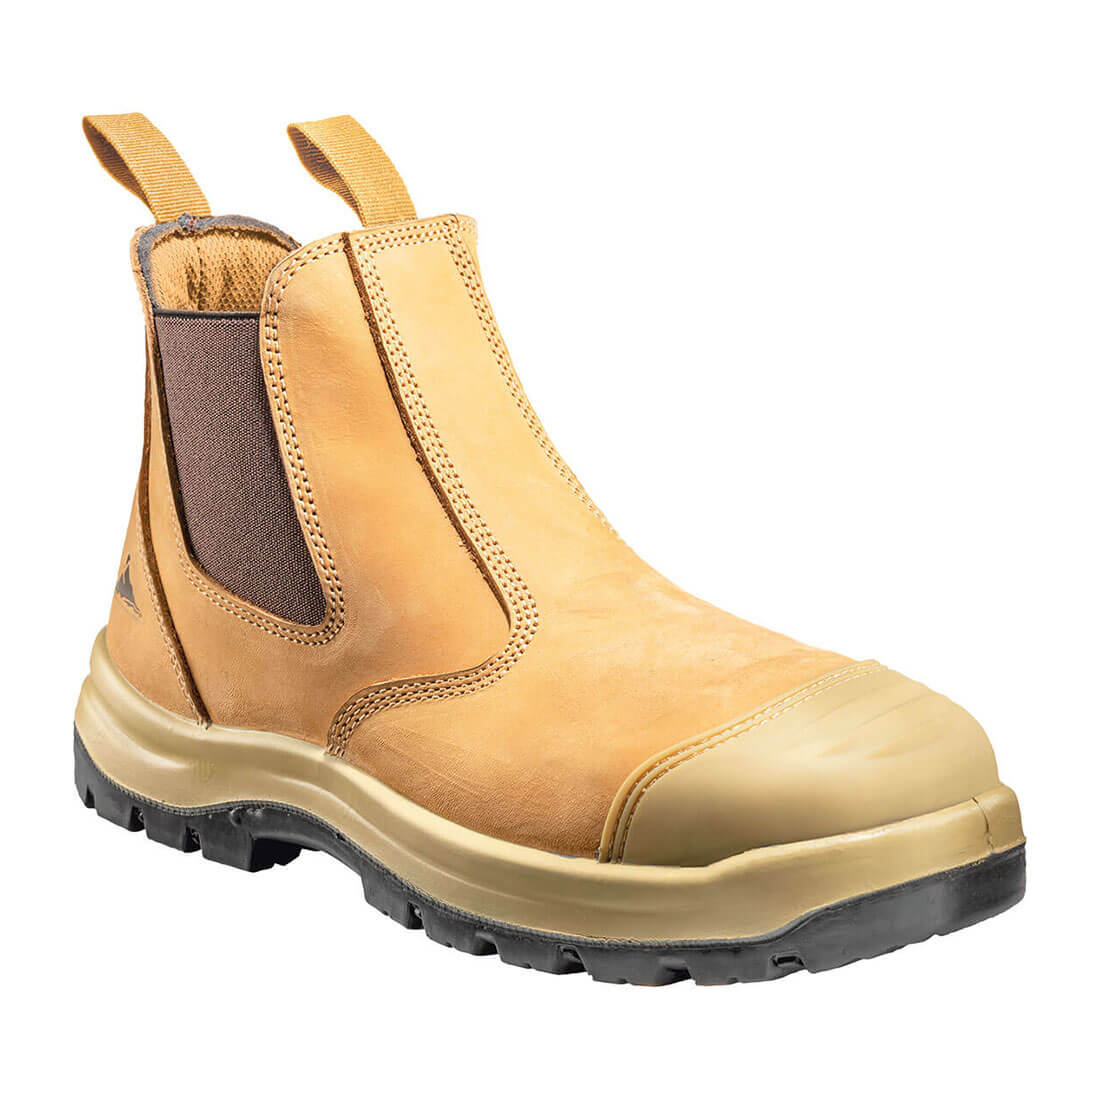 FT71 Safety Dealer boot S3 Wheat